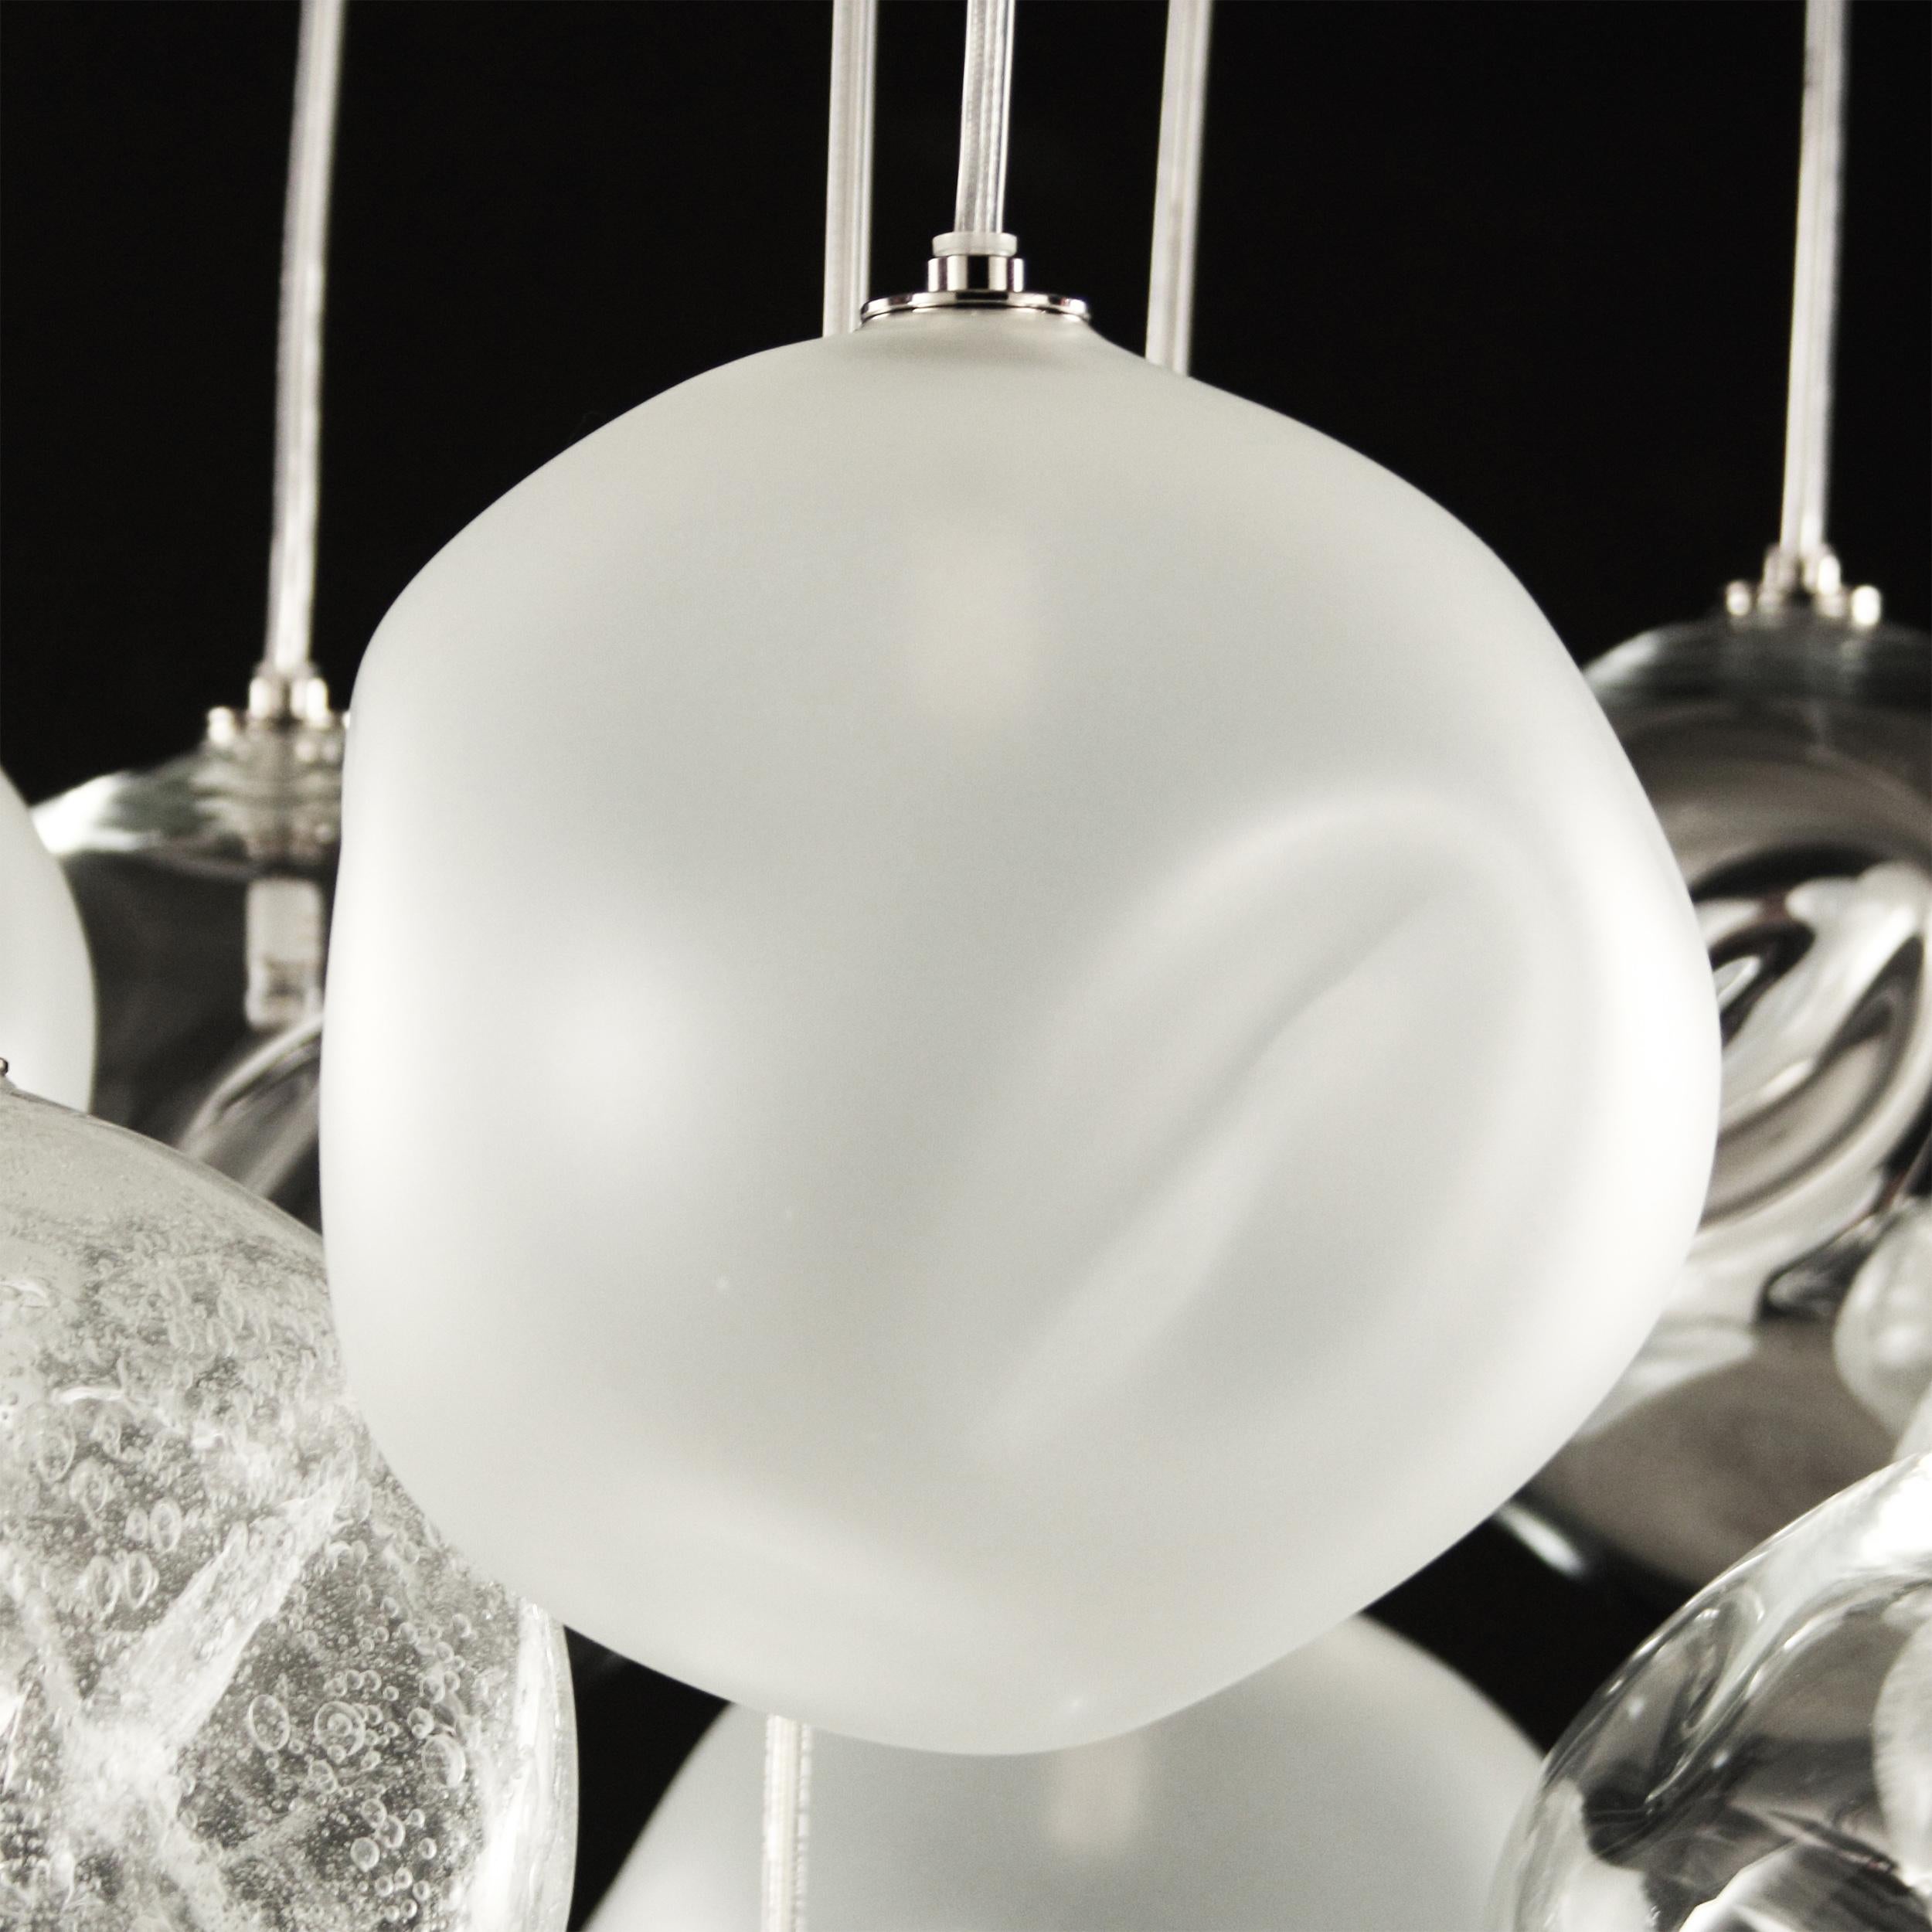 Artistic ceiling lamp, glass spheres in clear, satined, mirrored and pulegoso.
Elegant and unmistakable, suggestive and poetical, soft and delicate are some of the adjectives that can be used to describe the blown glass ball chandelier Desafinado,